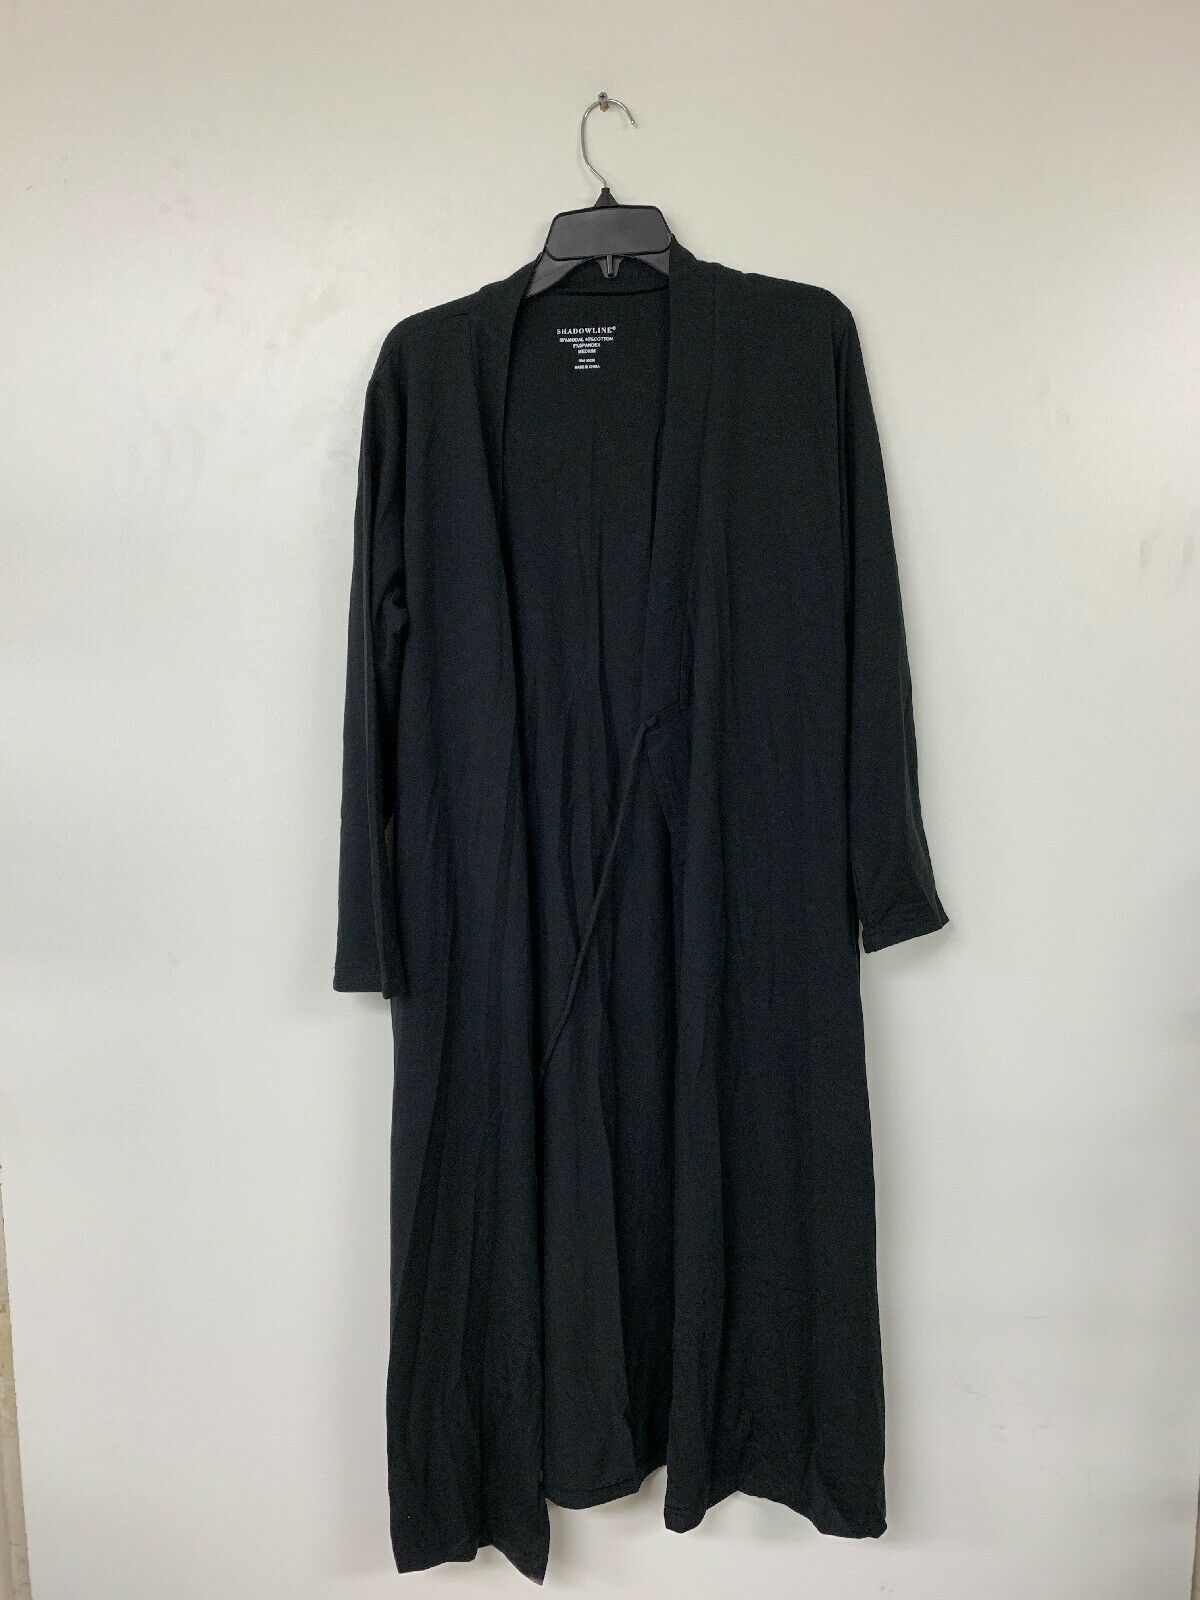 Shadowline Womens Bed Robe, Size Medium, Black, New Without Tags ...